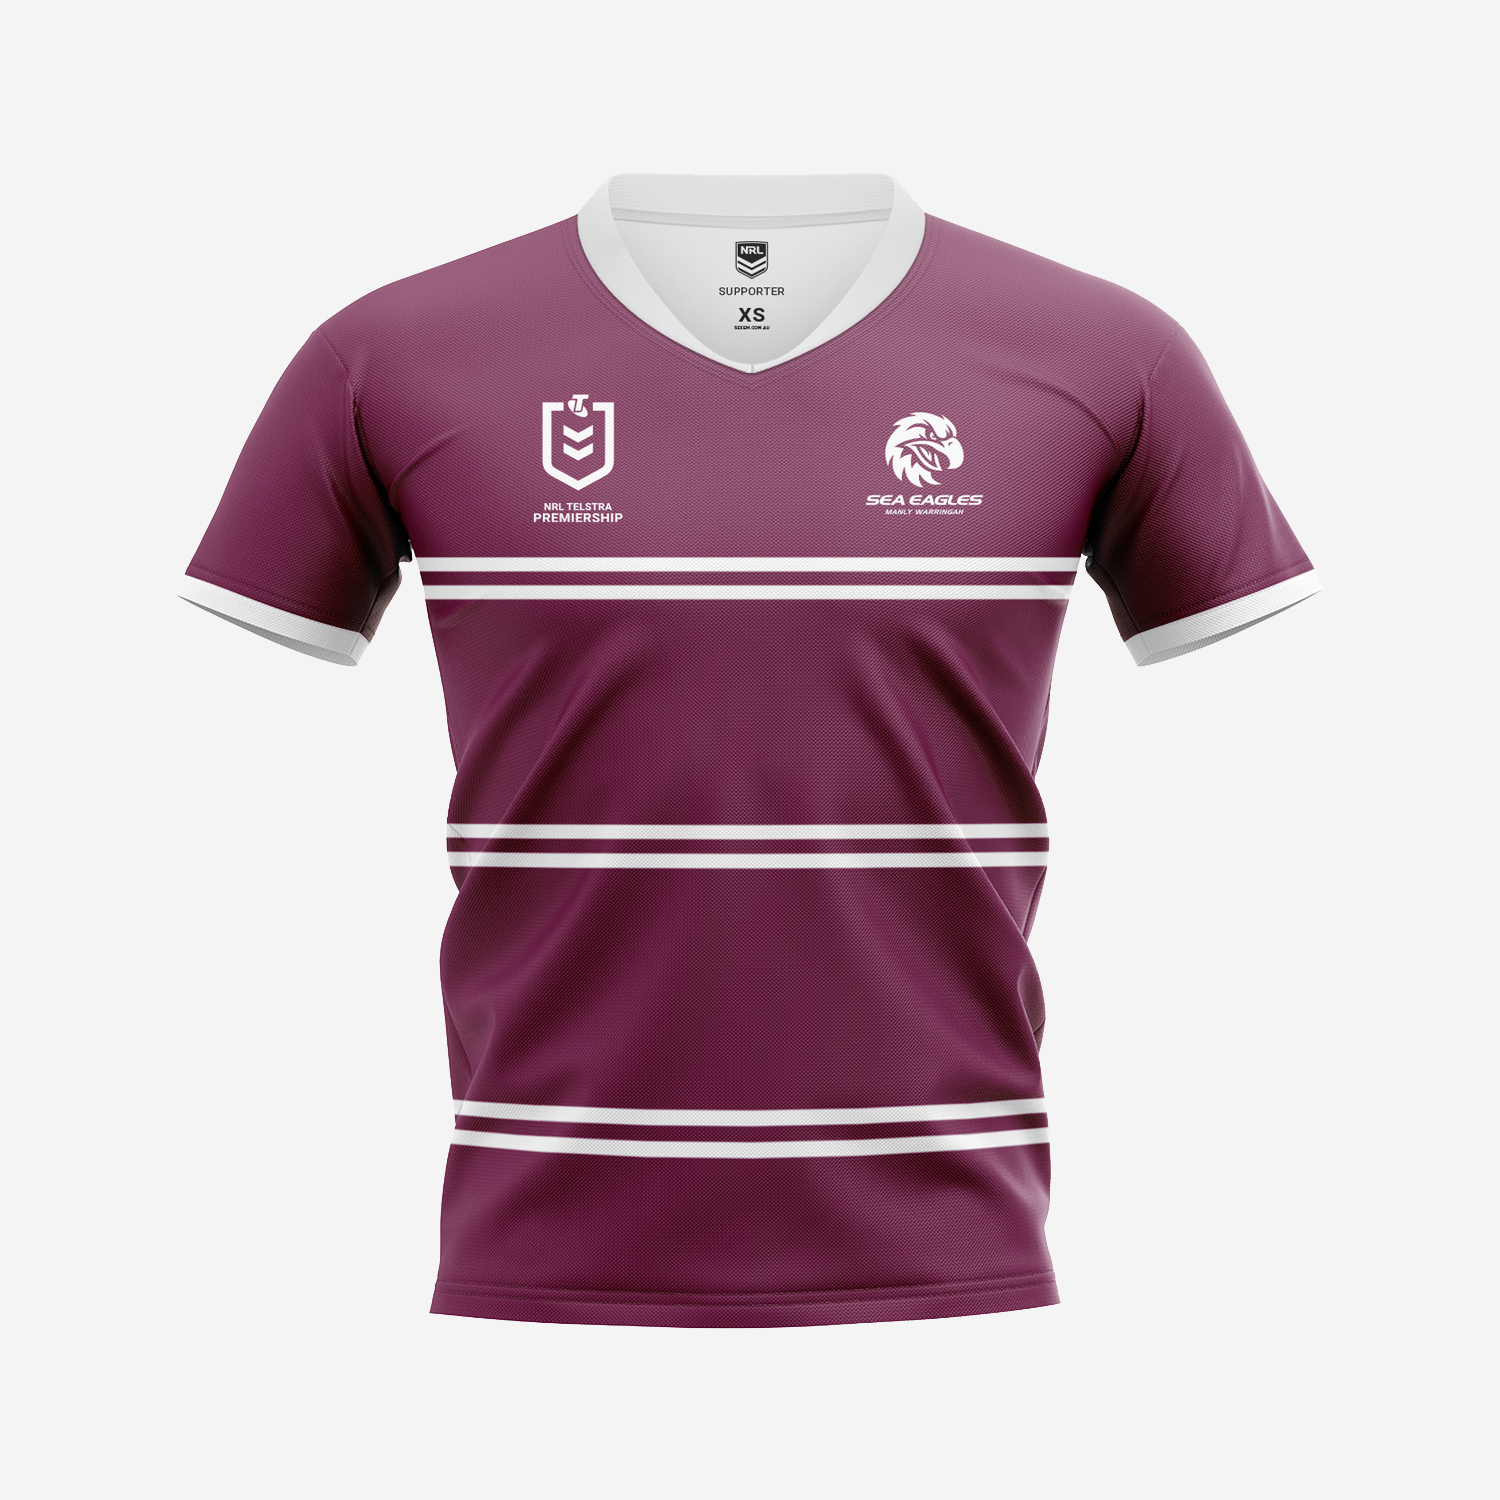 Manly Jersey